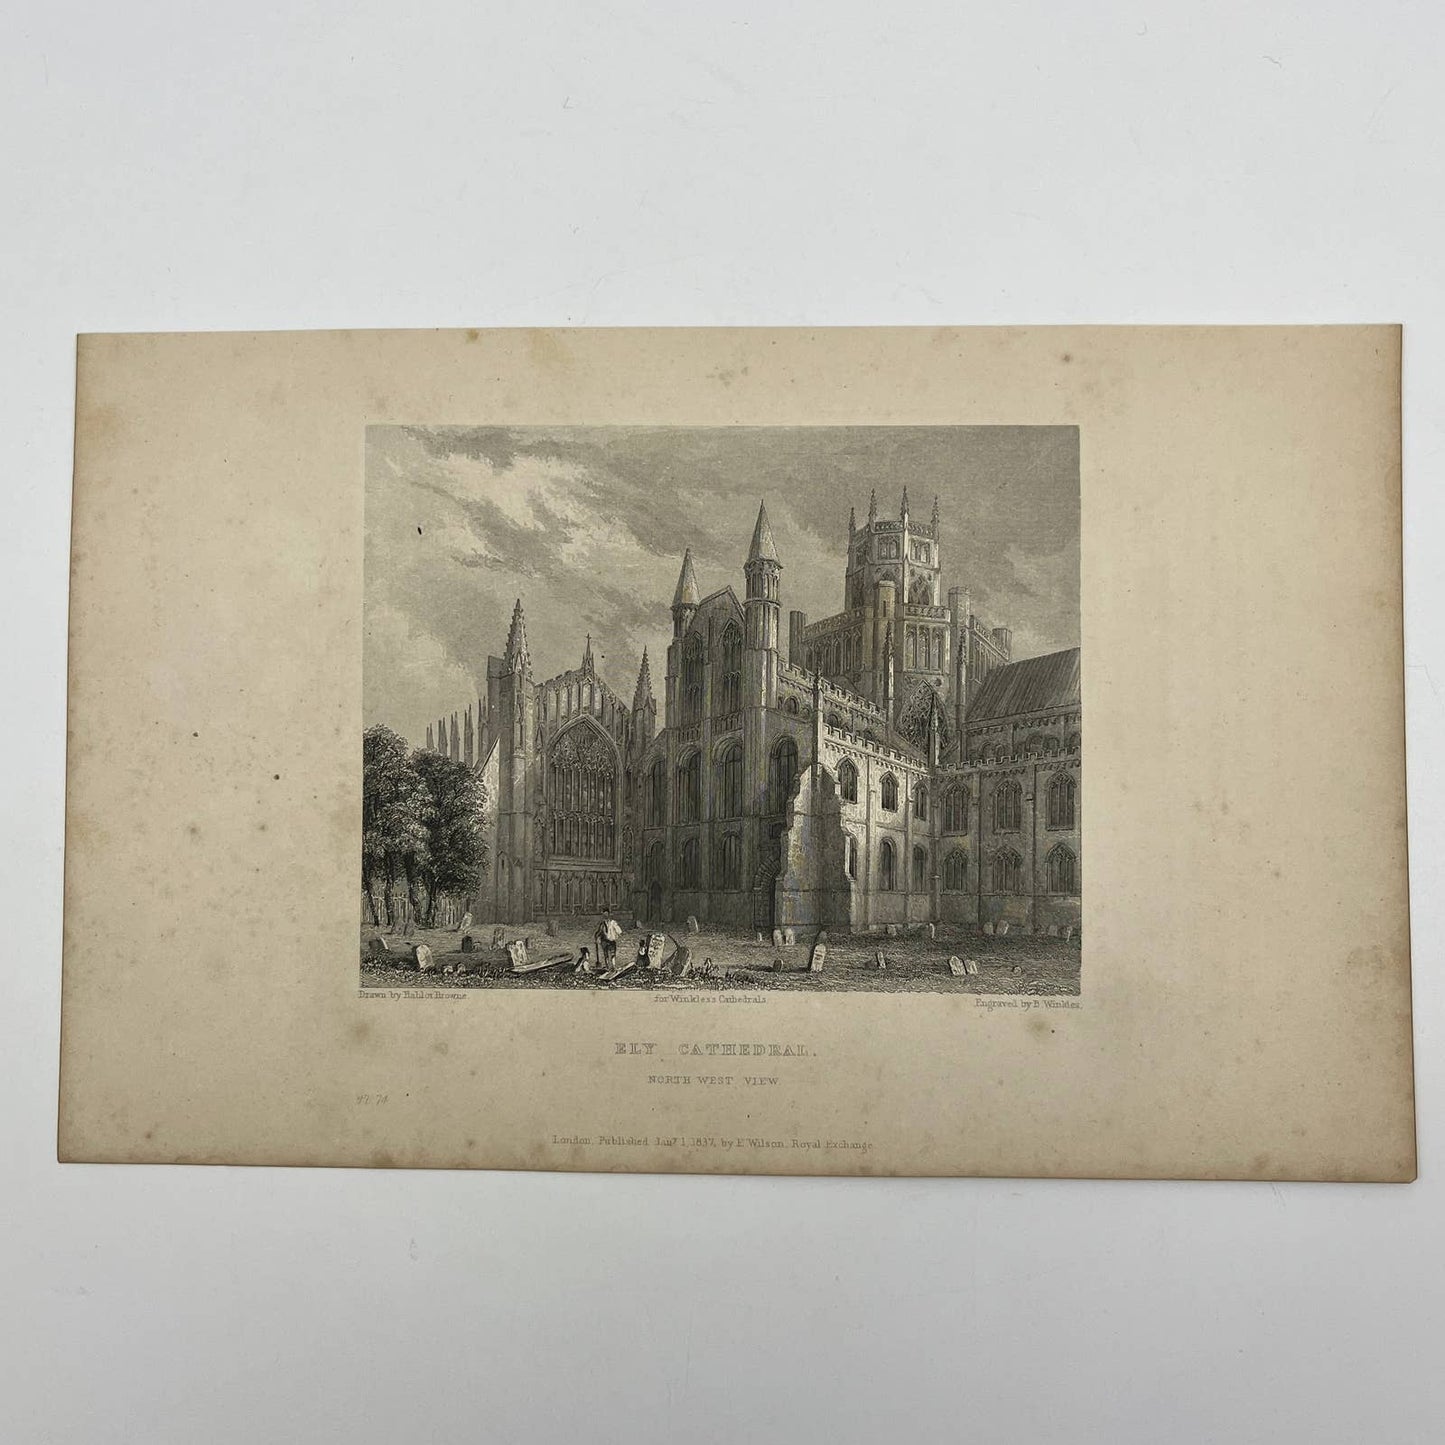 1836 Original Art Engraving Ely Cathedral View of the North West AC4